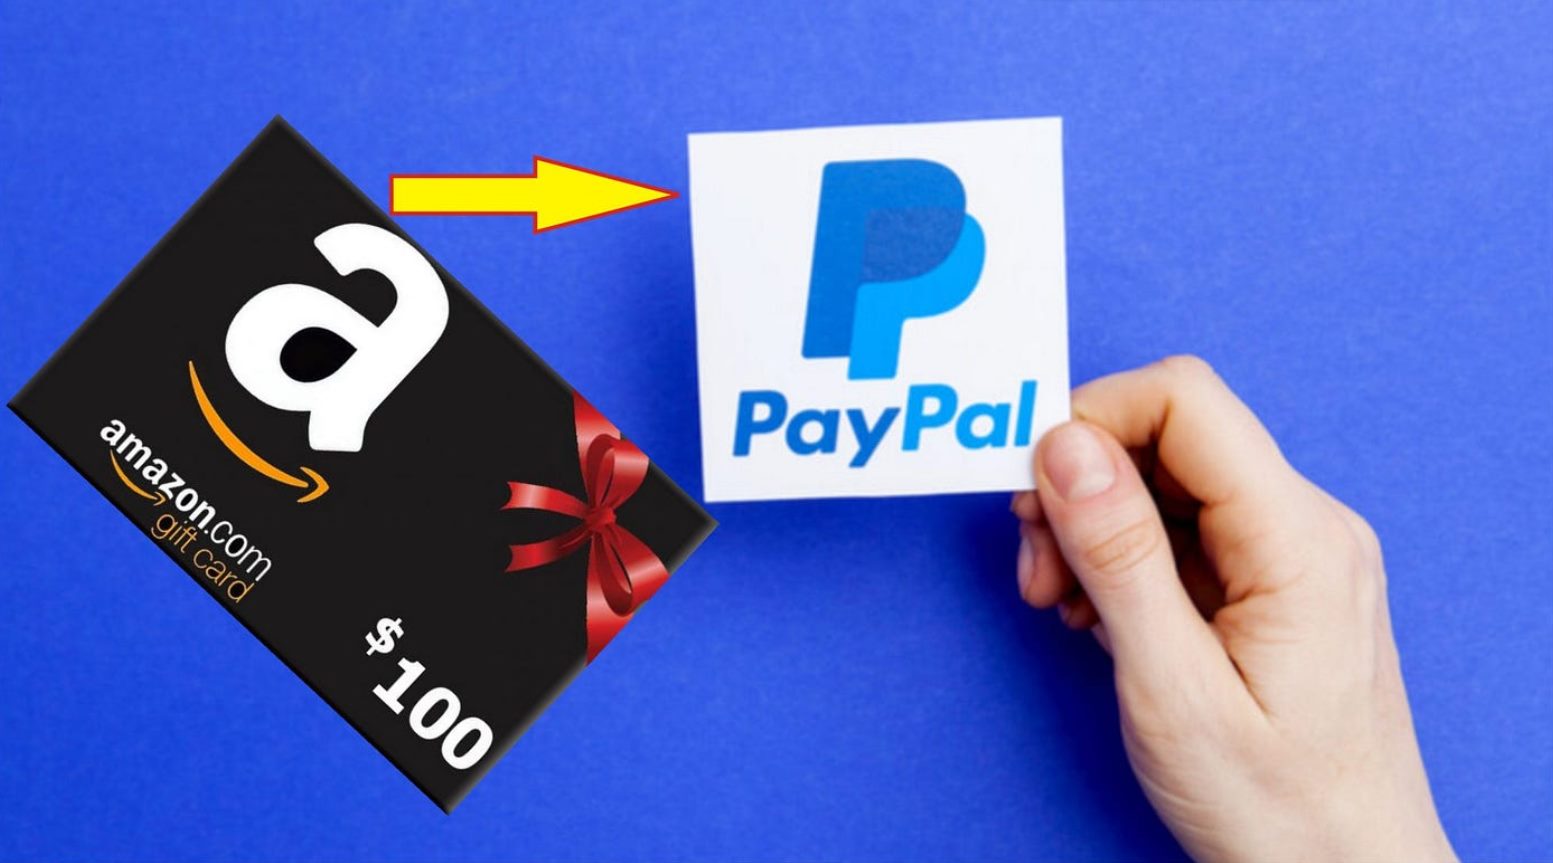 How To Buy Gift Cards With PayPal